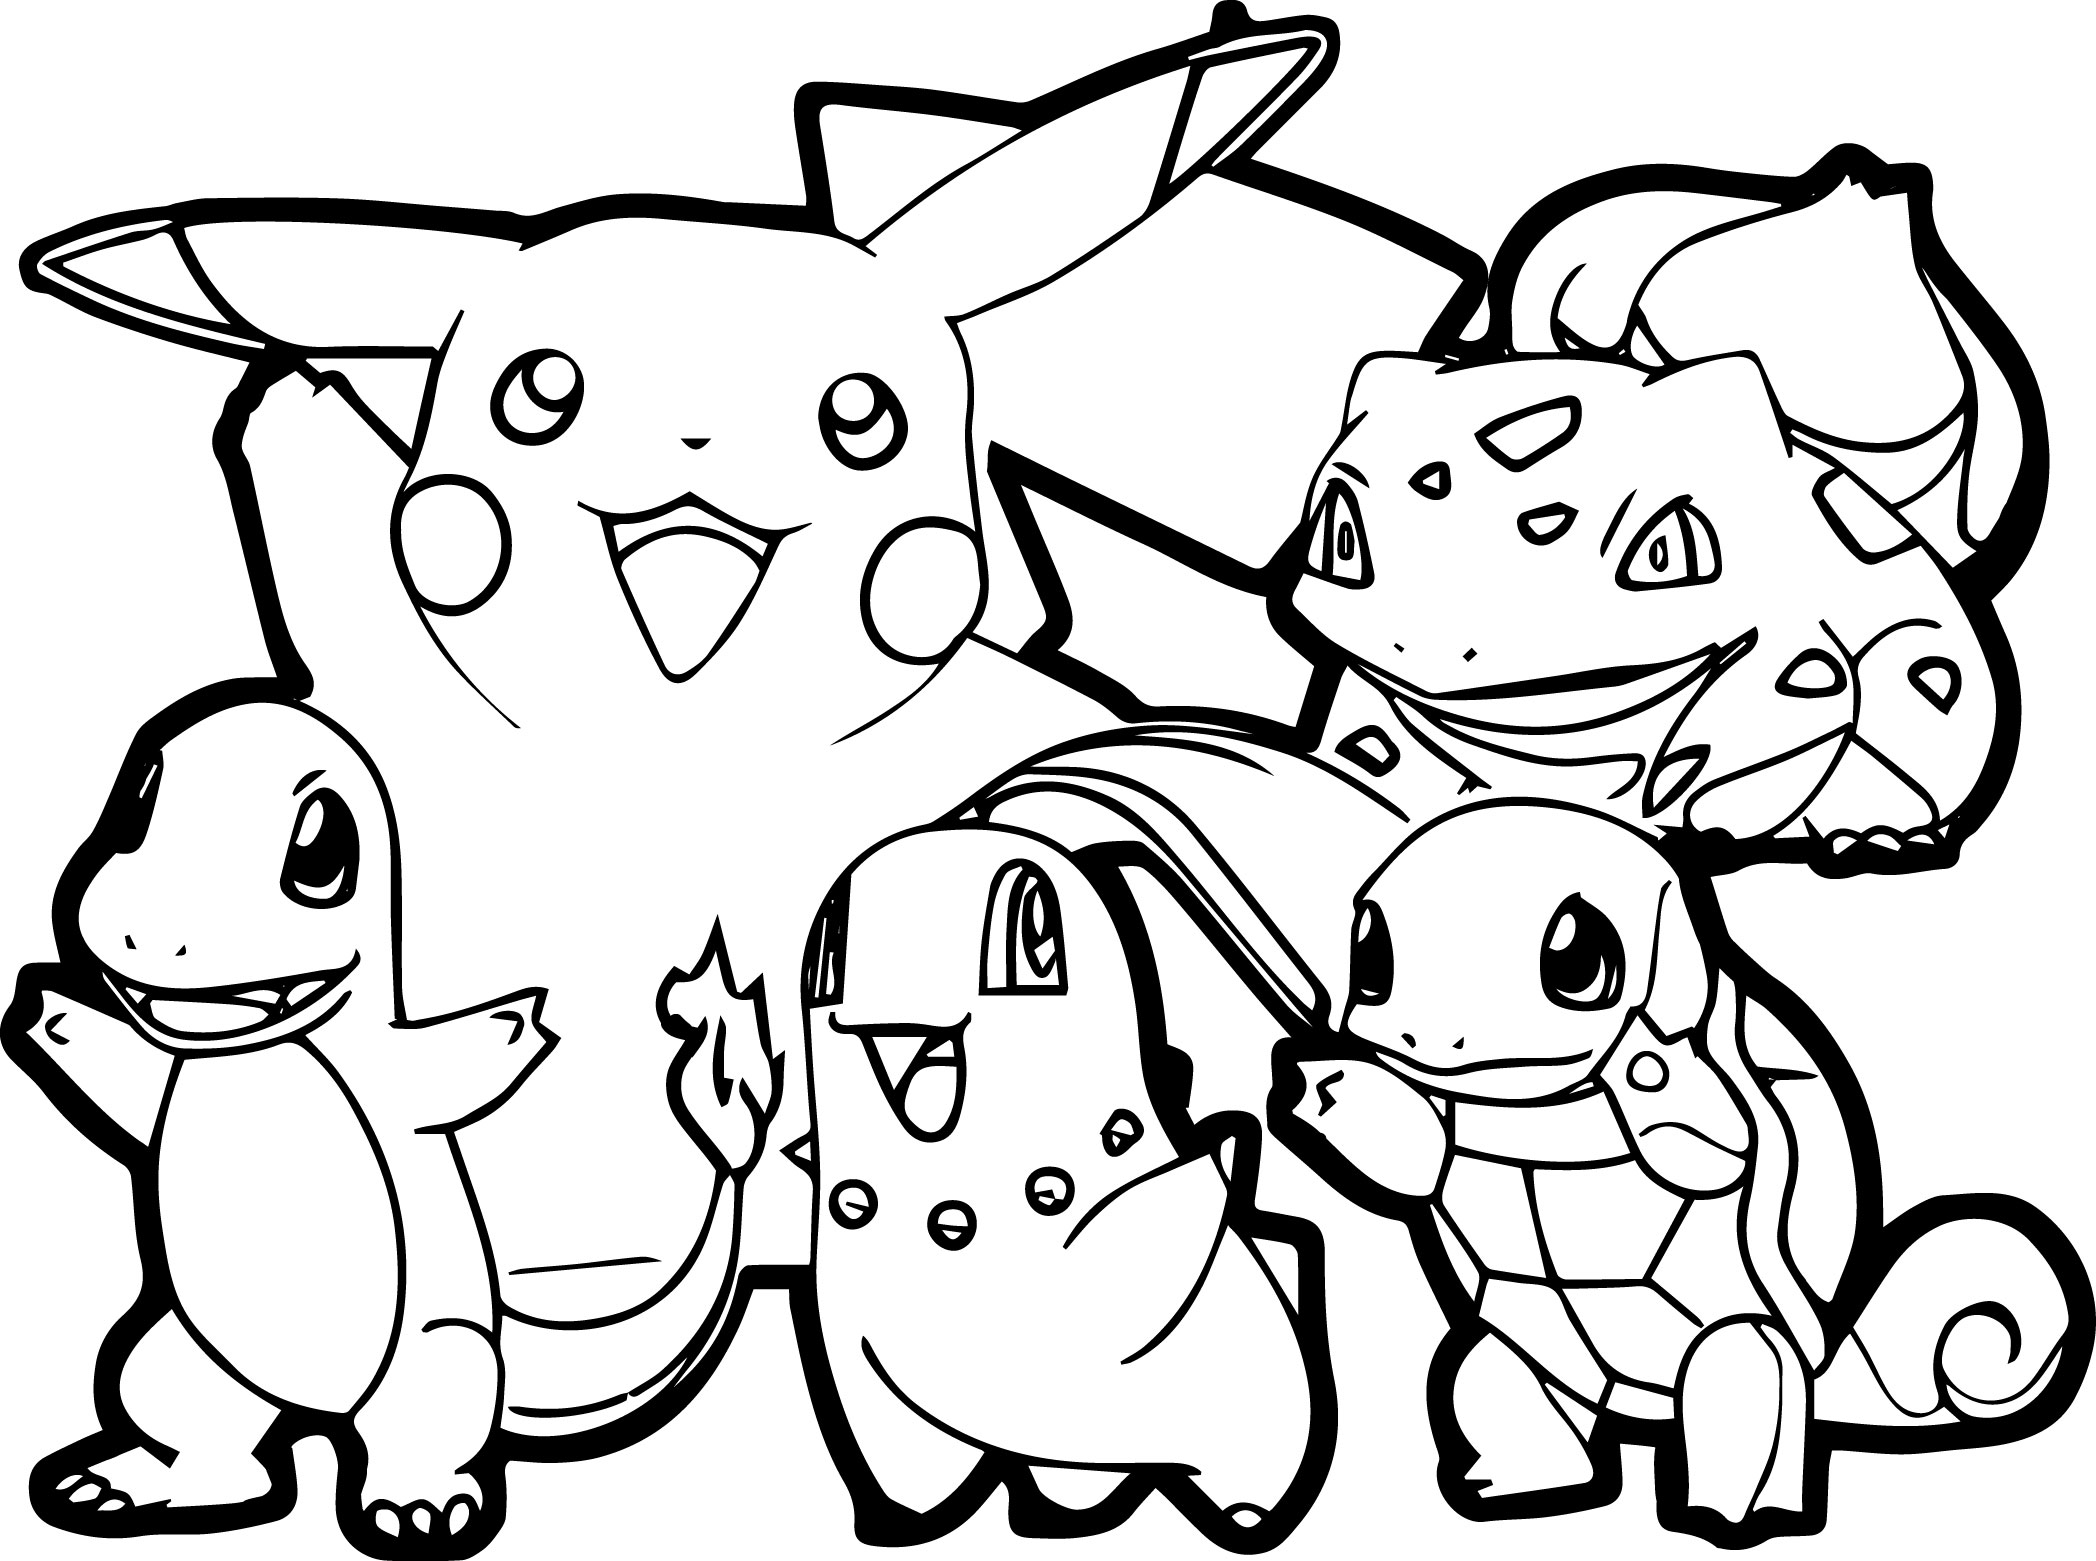 Pokemon Coloring Page With Very Thick Lines All Pokemon Coloring Pages Kids Coloring Pages